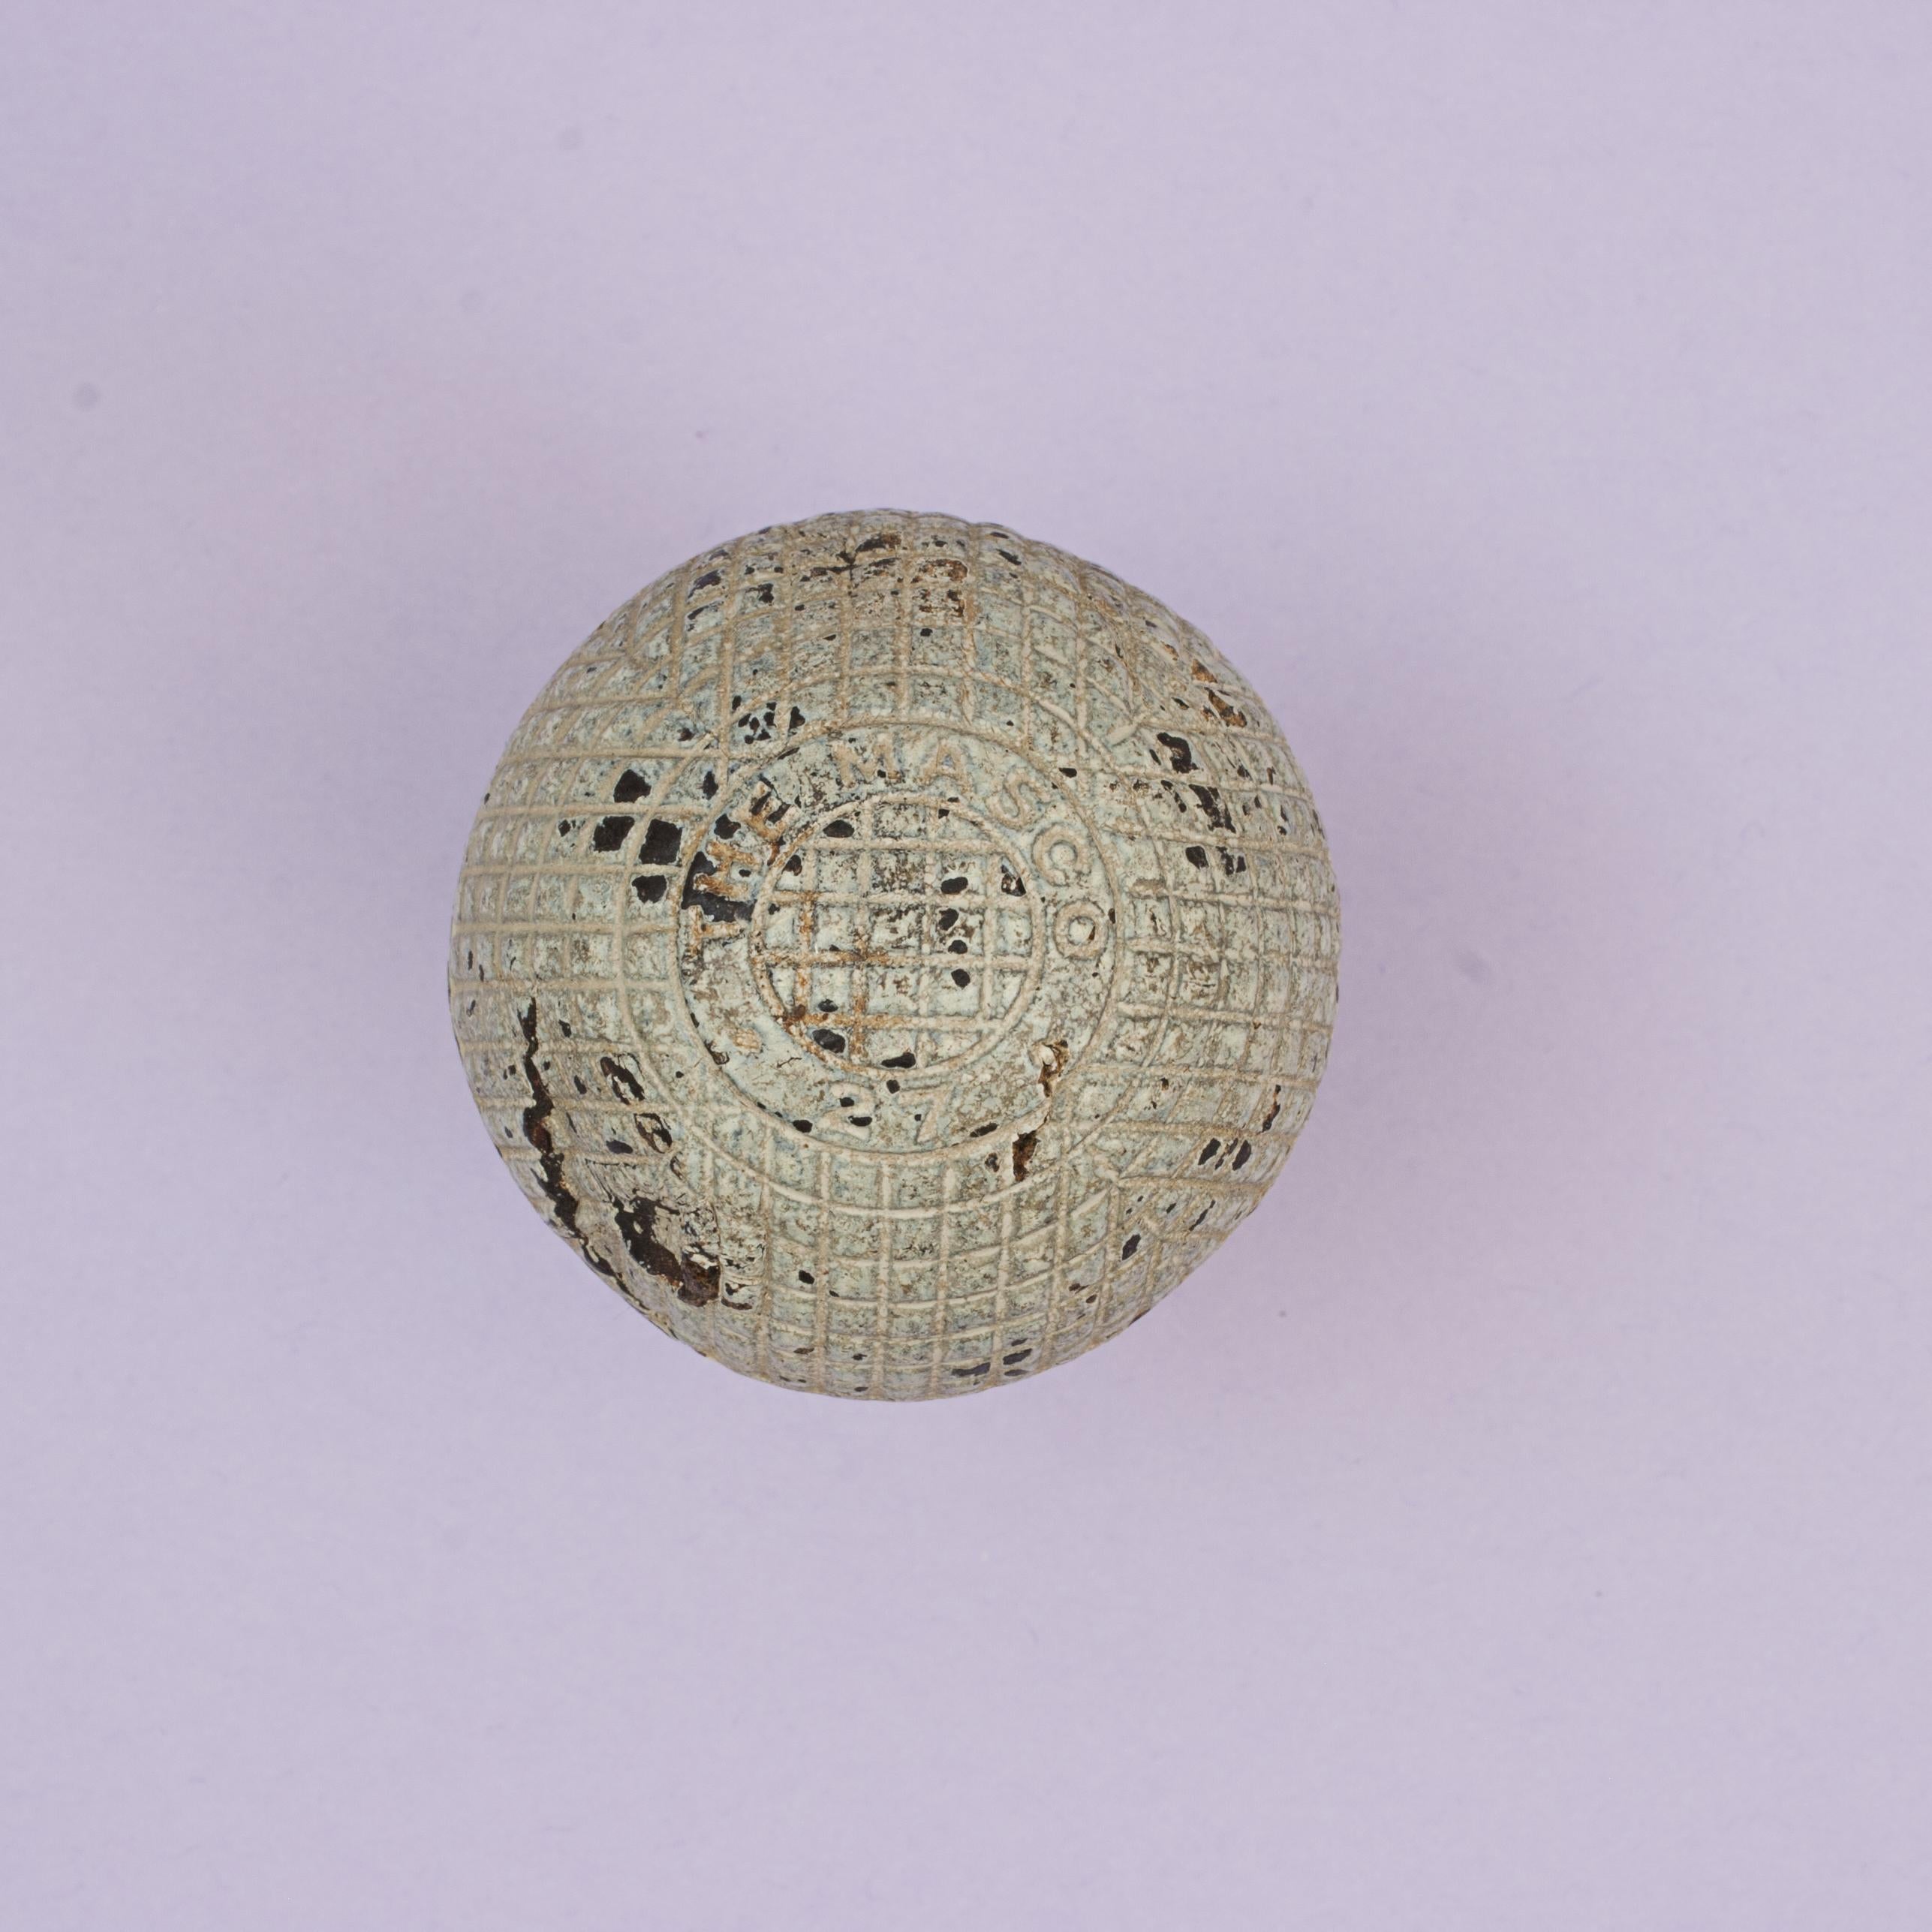 The Mascot, Antique Gutta Percha Golf Ball.
A good example of a moulded mesh patterned Victorian gutta percha golf ball. The ball is marked ''The Mascot 27' on a raised circular band on both poles of the ball and is with the classic mesh pattern.